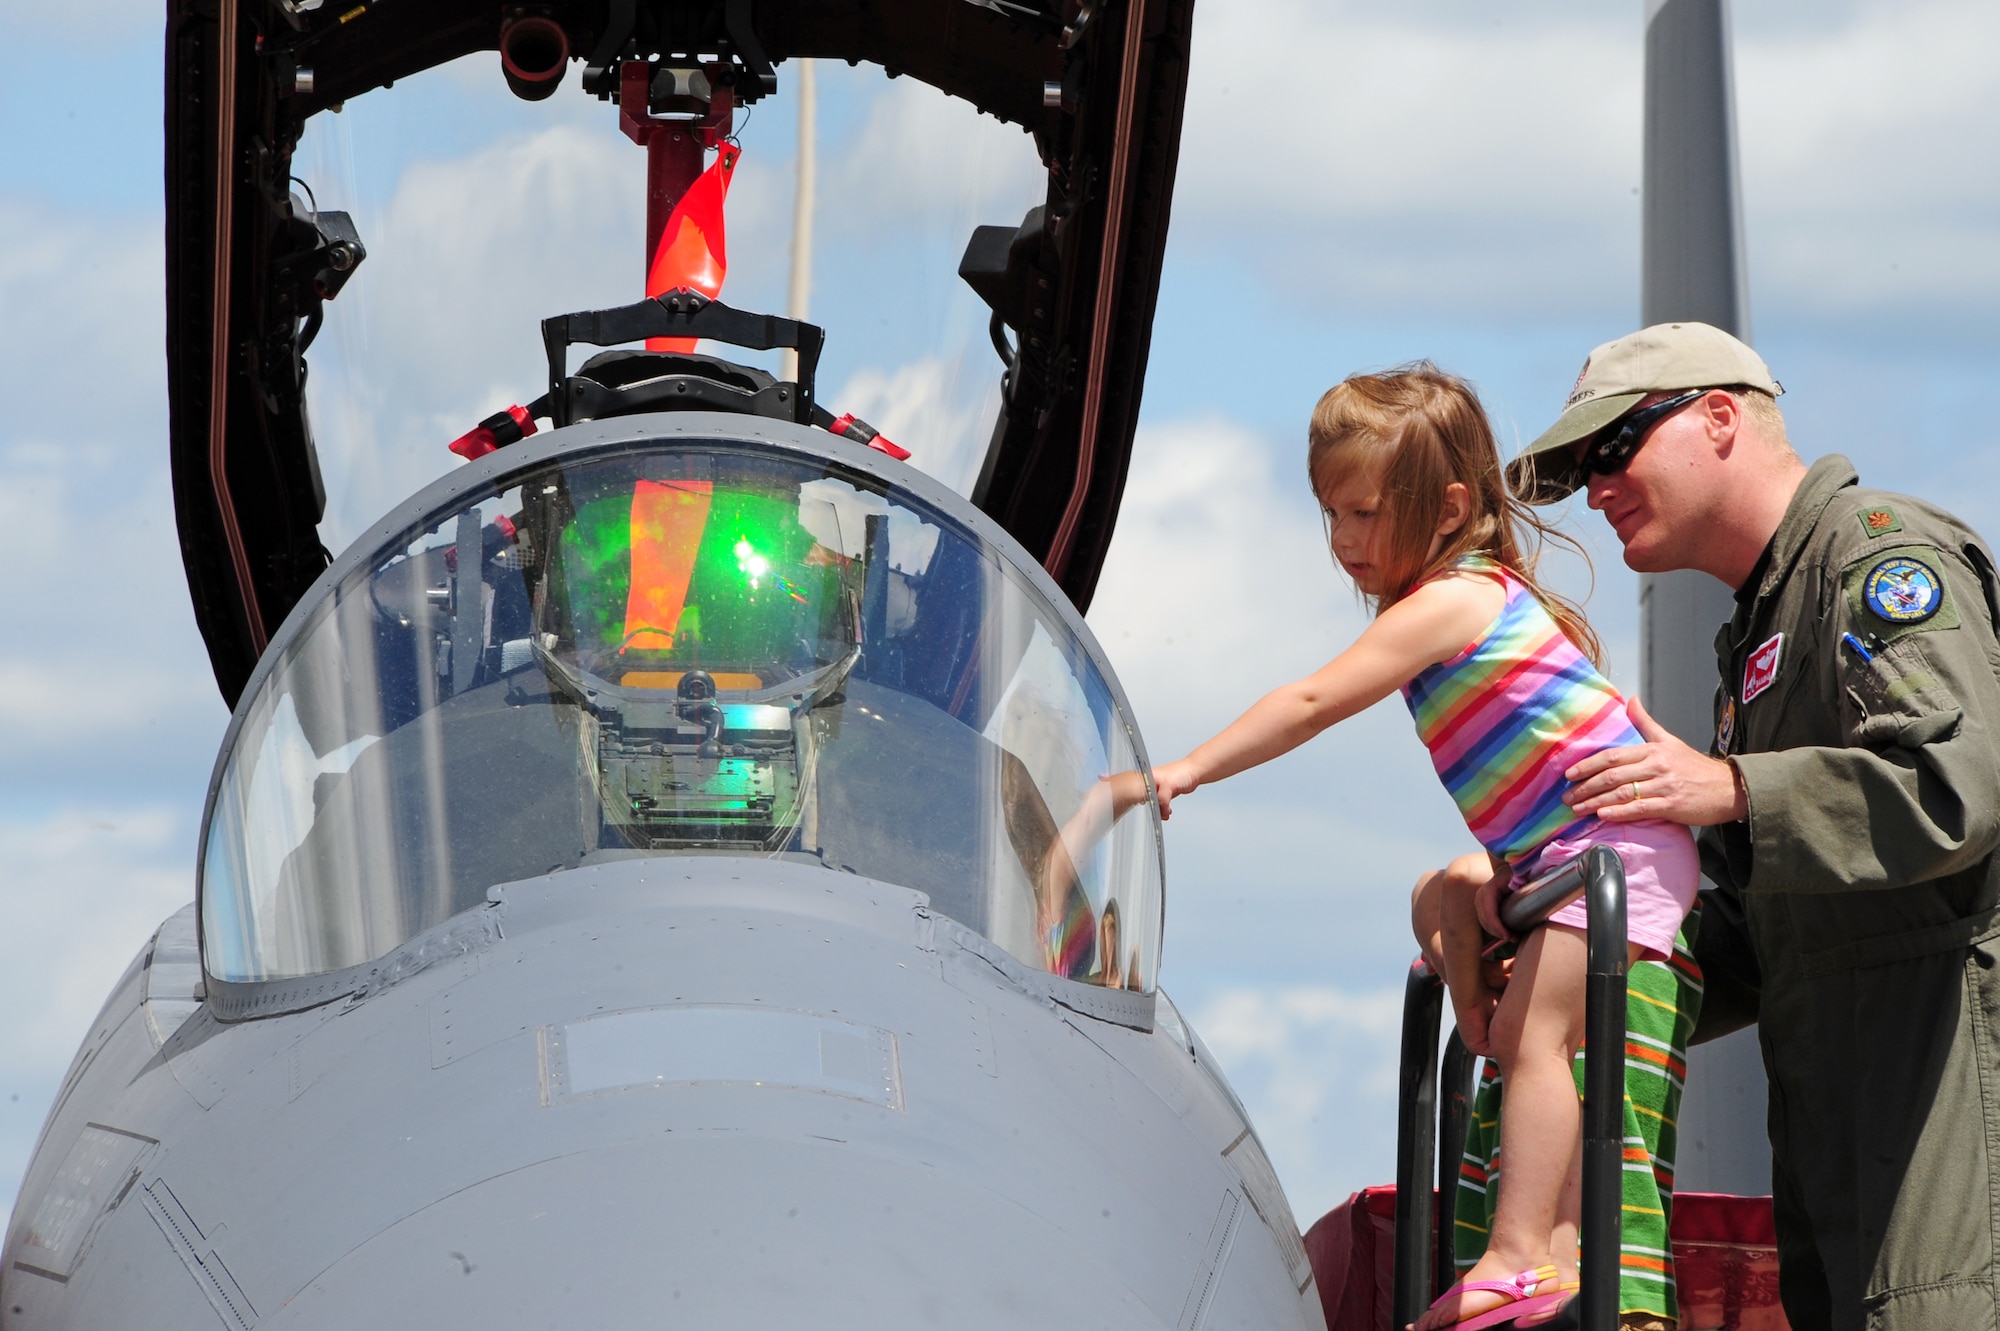 BARKSDALE AIR FORCE BASE, La. -- Eglin Air Force Base's Maj. Darren Wees, 40th Flight Test Squadron, shows Hannah Higgins, 6, the interior of an F-15E Strike Eagle during the Defenders of Liberty Air Show April 25. Like many other families who traveled to attend the air show, some from as far as Mexico, the Higgins family traveled from Texas to visit Barksdale. (U.S. Air Force photo by Senior Airman Joanna M. Kresge)